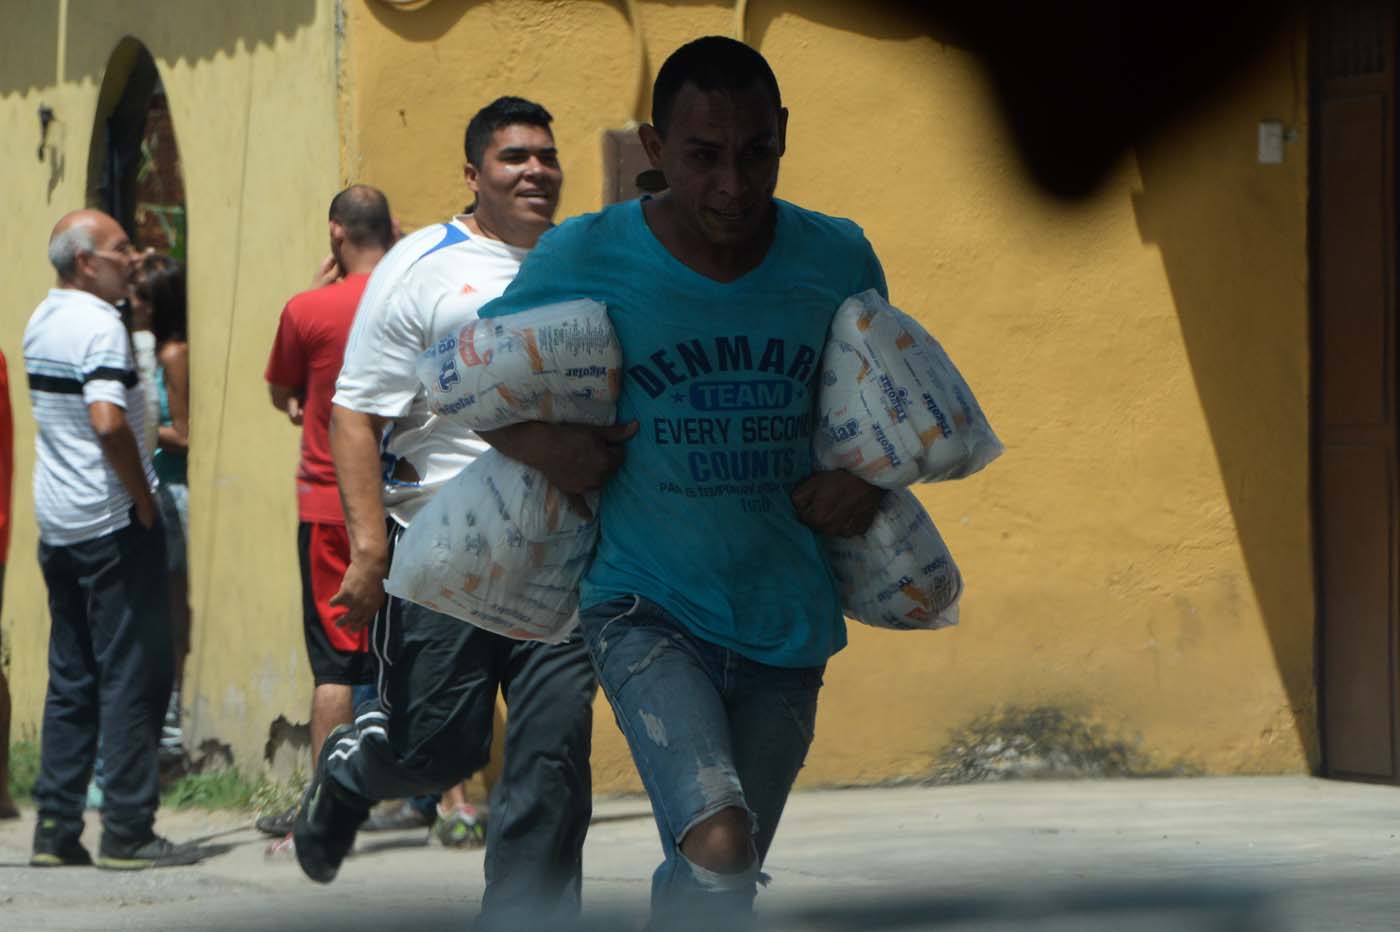 People carry stolen merchandise during lootings in Maracay, Aragua State, Venezuela on June 27, 2017. A political and economic crisis in the oil-producing country has spawned often violent demonstrations by protesters demanding President Nicolas Maduro's resignation and new elections. The unrest has left 76 people dead since April 1. / AFP PHOTO / Federico PARRA